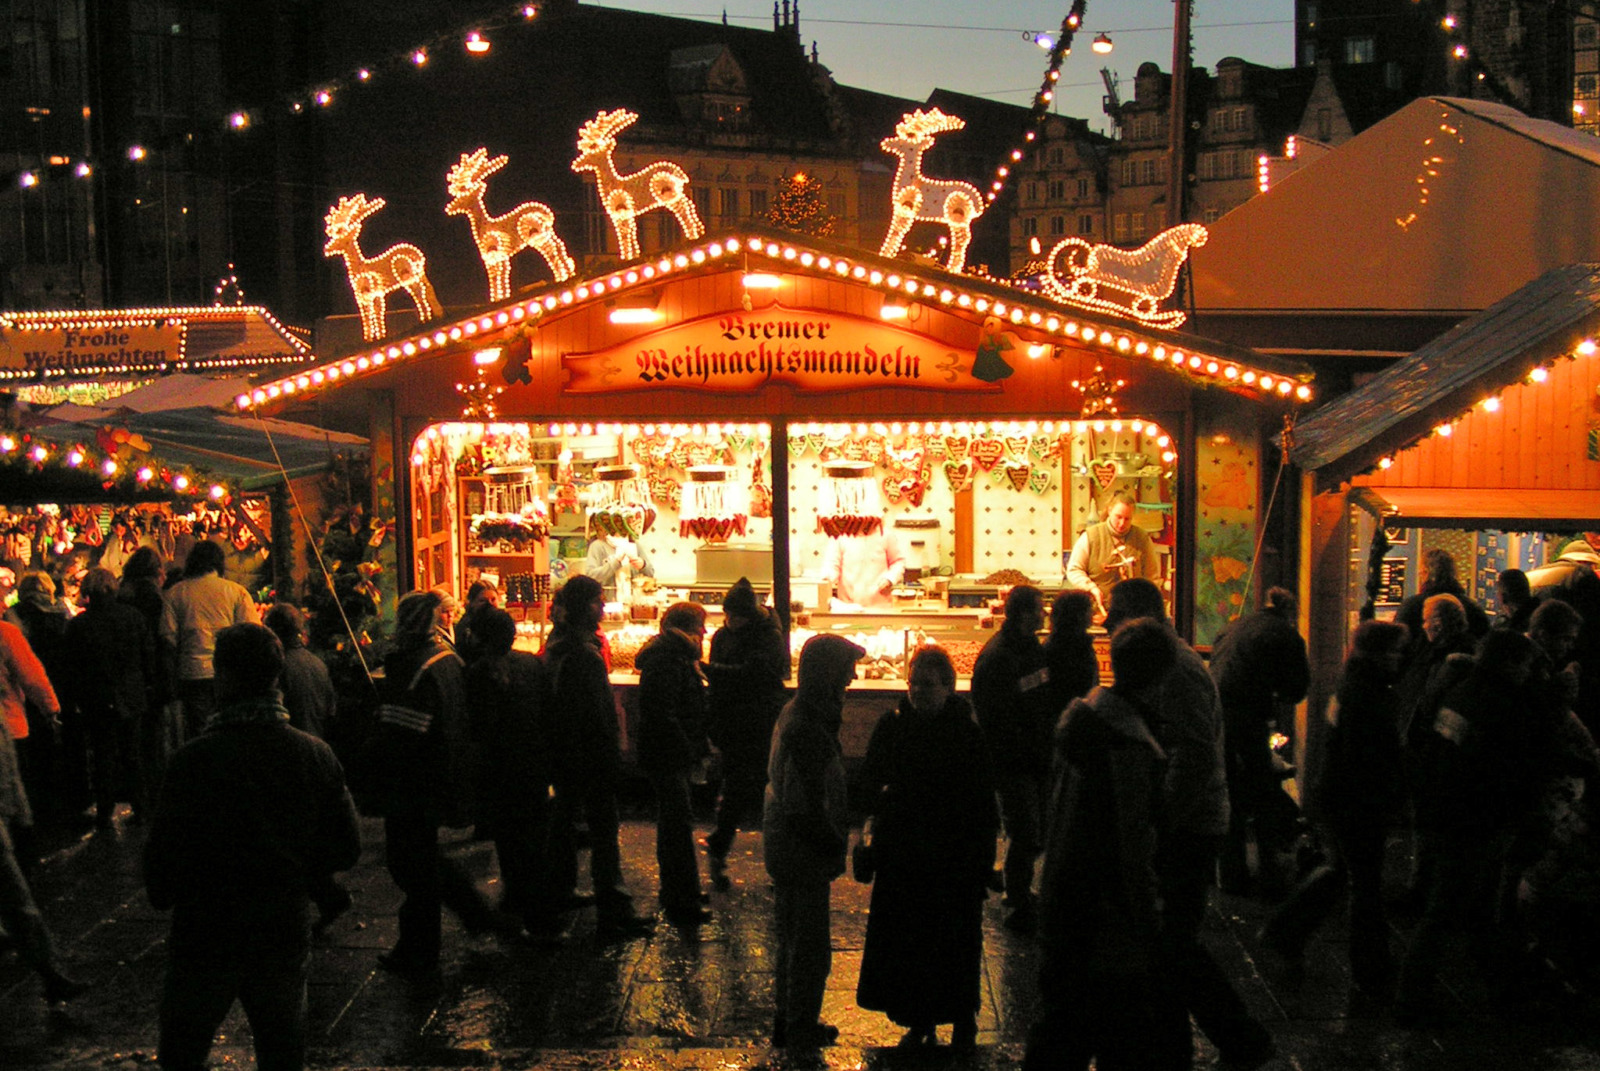 Bremen Christmas Market © Corradox - licence [CC BY-SA 3.0] from Wikimedia Commons